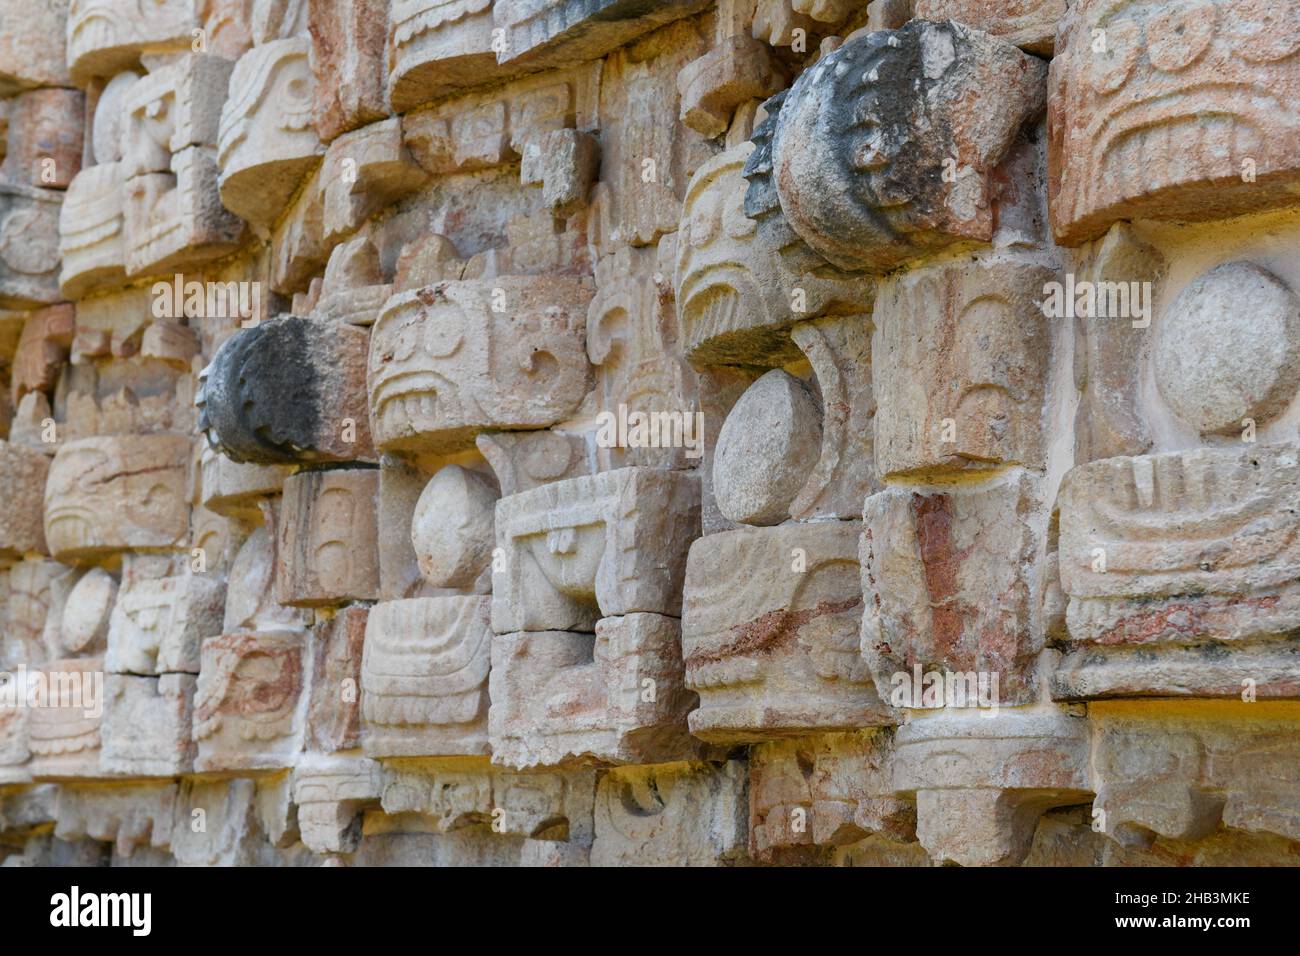 Details at the Palace of the Masks, Kabah, Mayan archaeological site in the Puuc region of Western Yucatan, Mexico Stock Photo